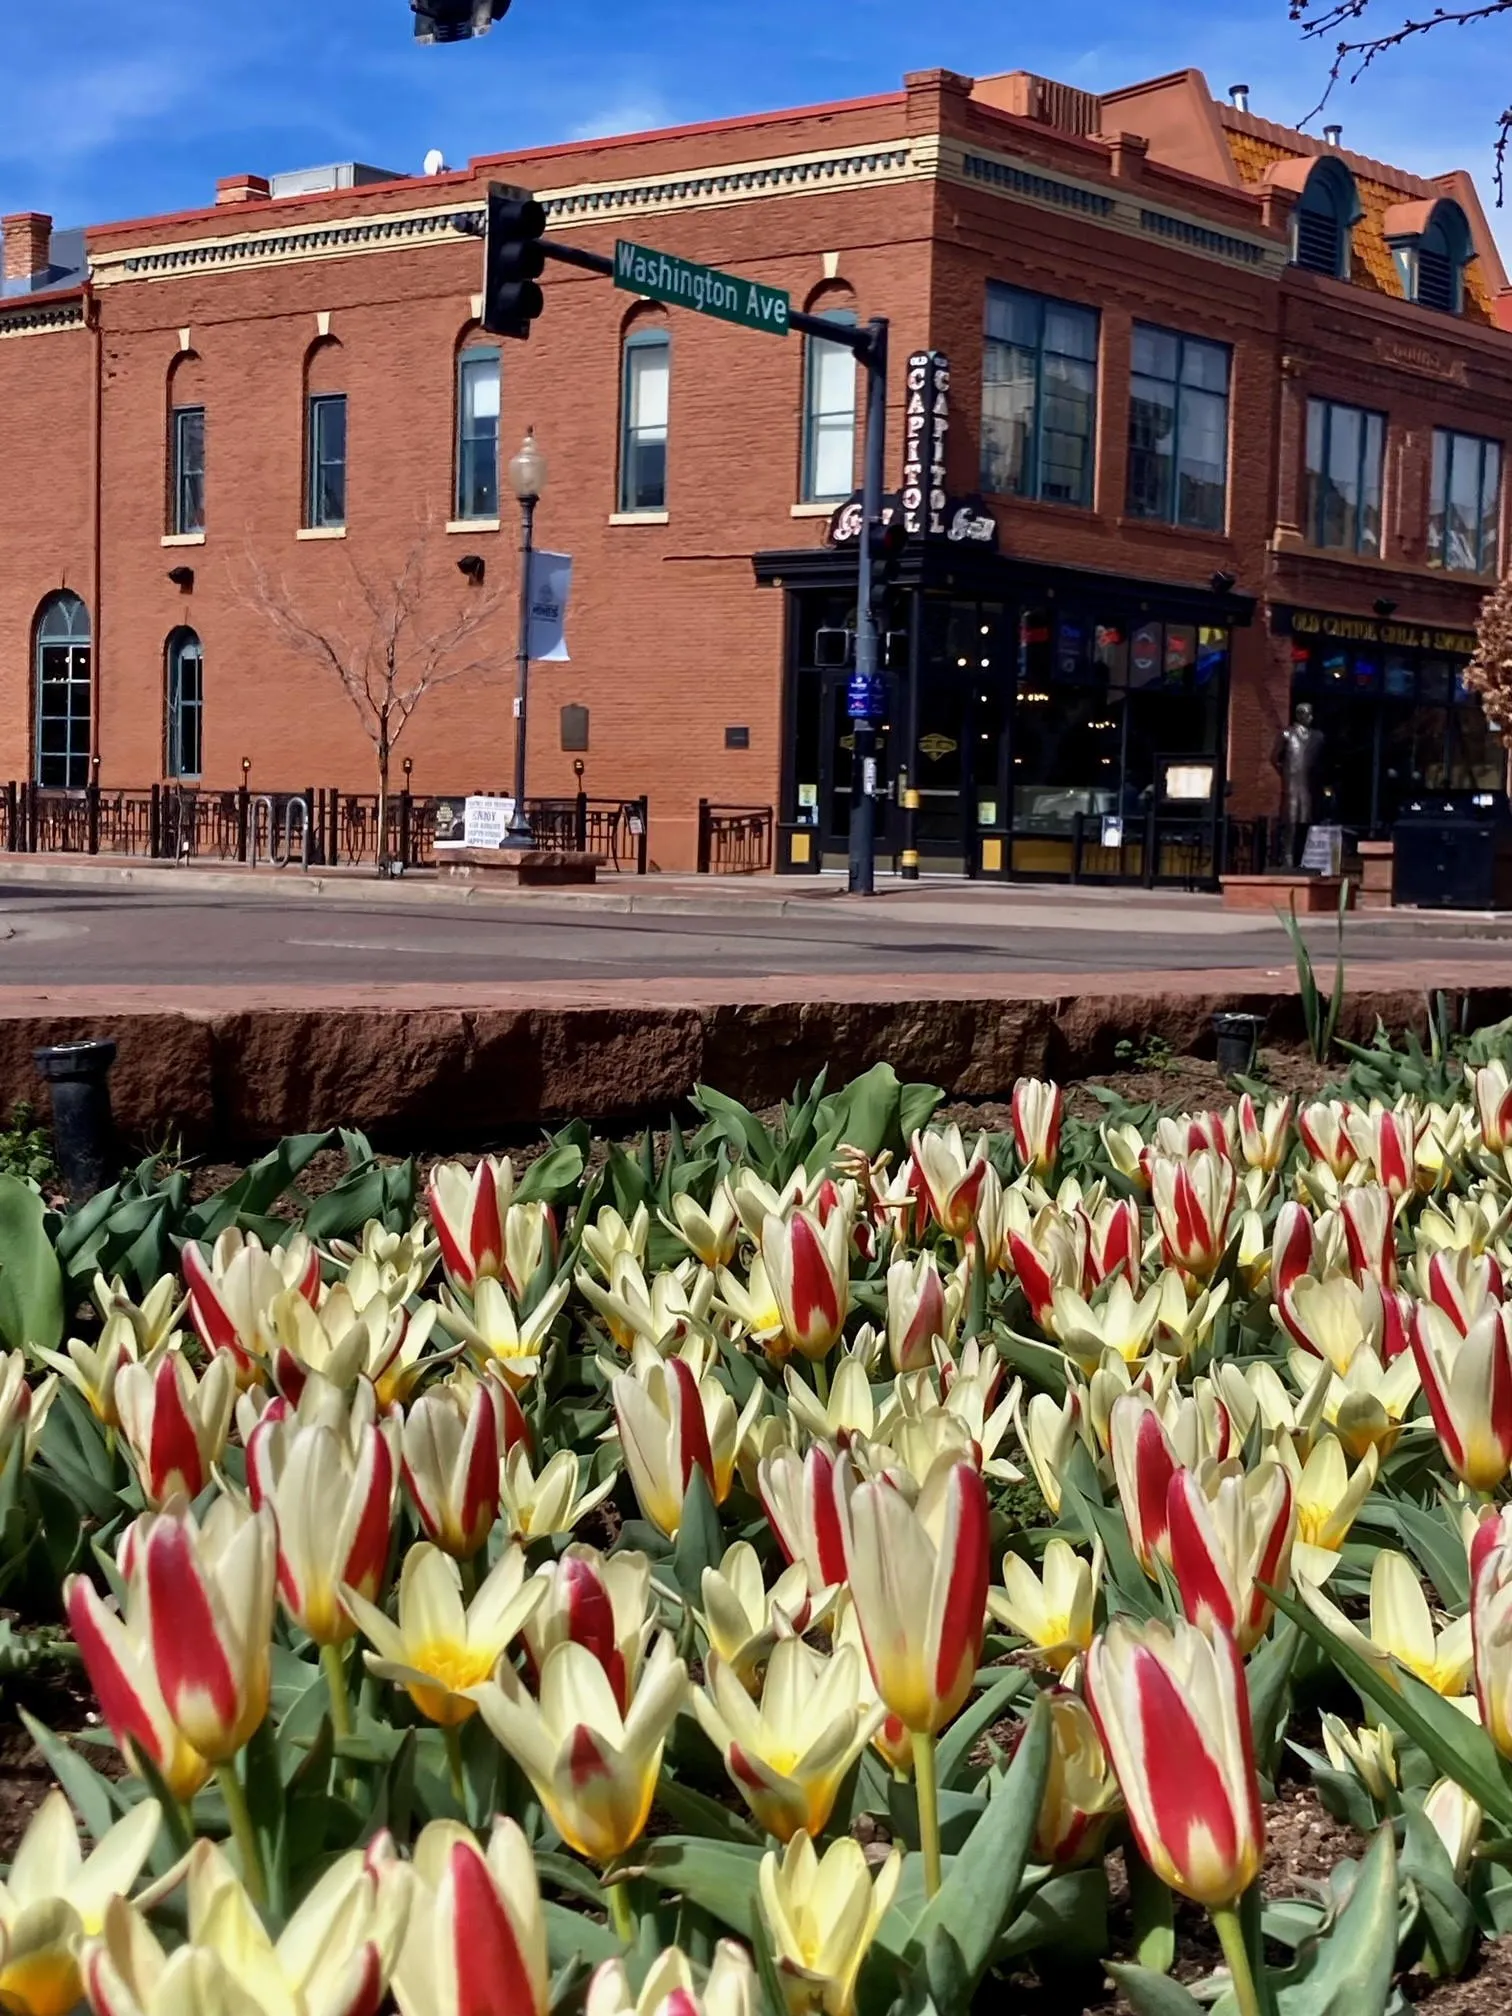 Red and pale yellow tulips in the foreground and the Loveland building (Old Capitol Grill) in the background.